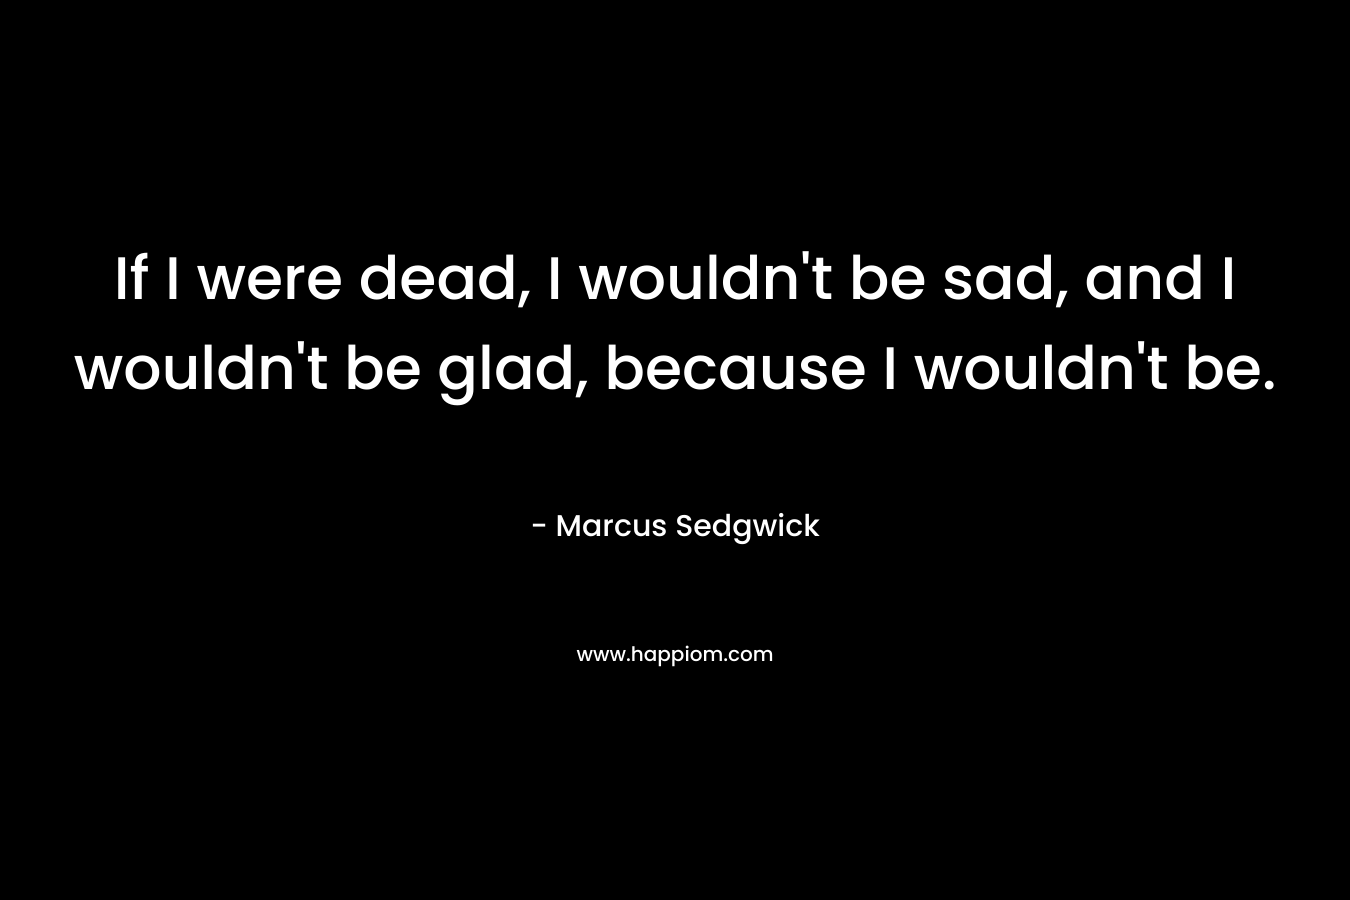 If I were dead, I wouldn’t be sad, and I wouldn’t be glad, because I wouldn’t be. – Marcus Sedgwick